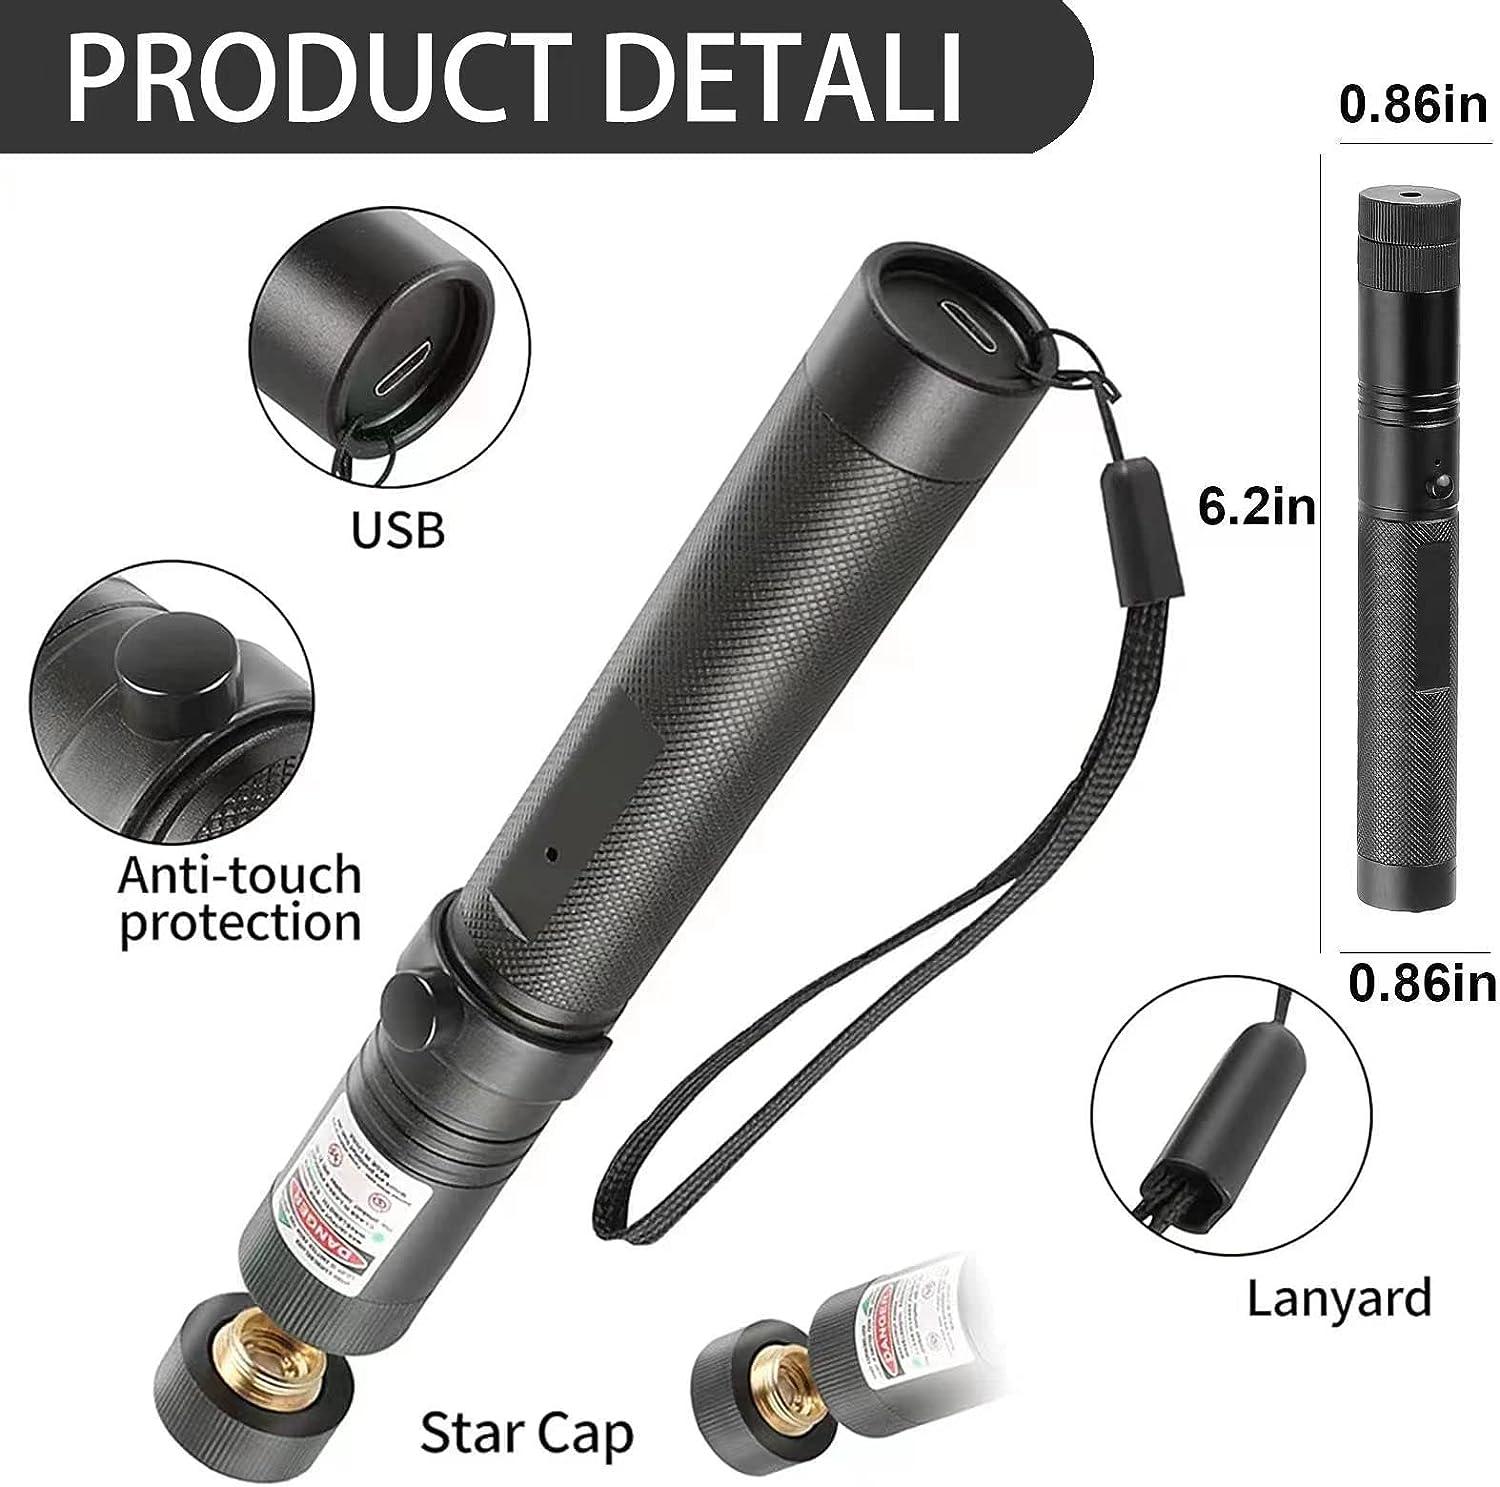 Laser Pointer High Power, Long Range Powerful Tactical Flashlight with  Adjustable Focus, Red Laser Pointer for Night Astronomy Outdoor Hunting and  Hiking 